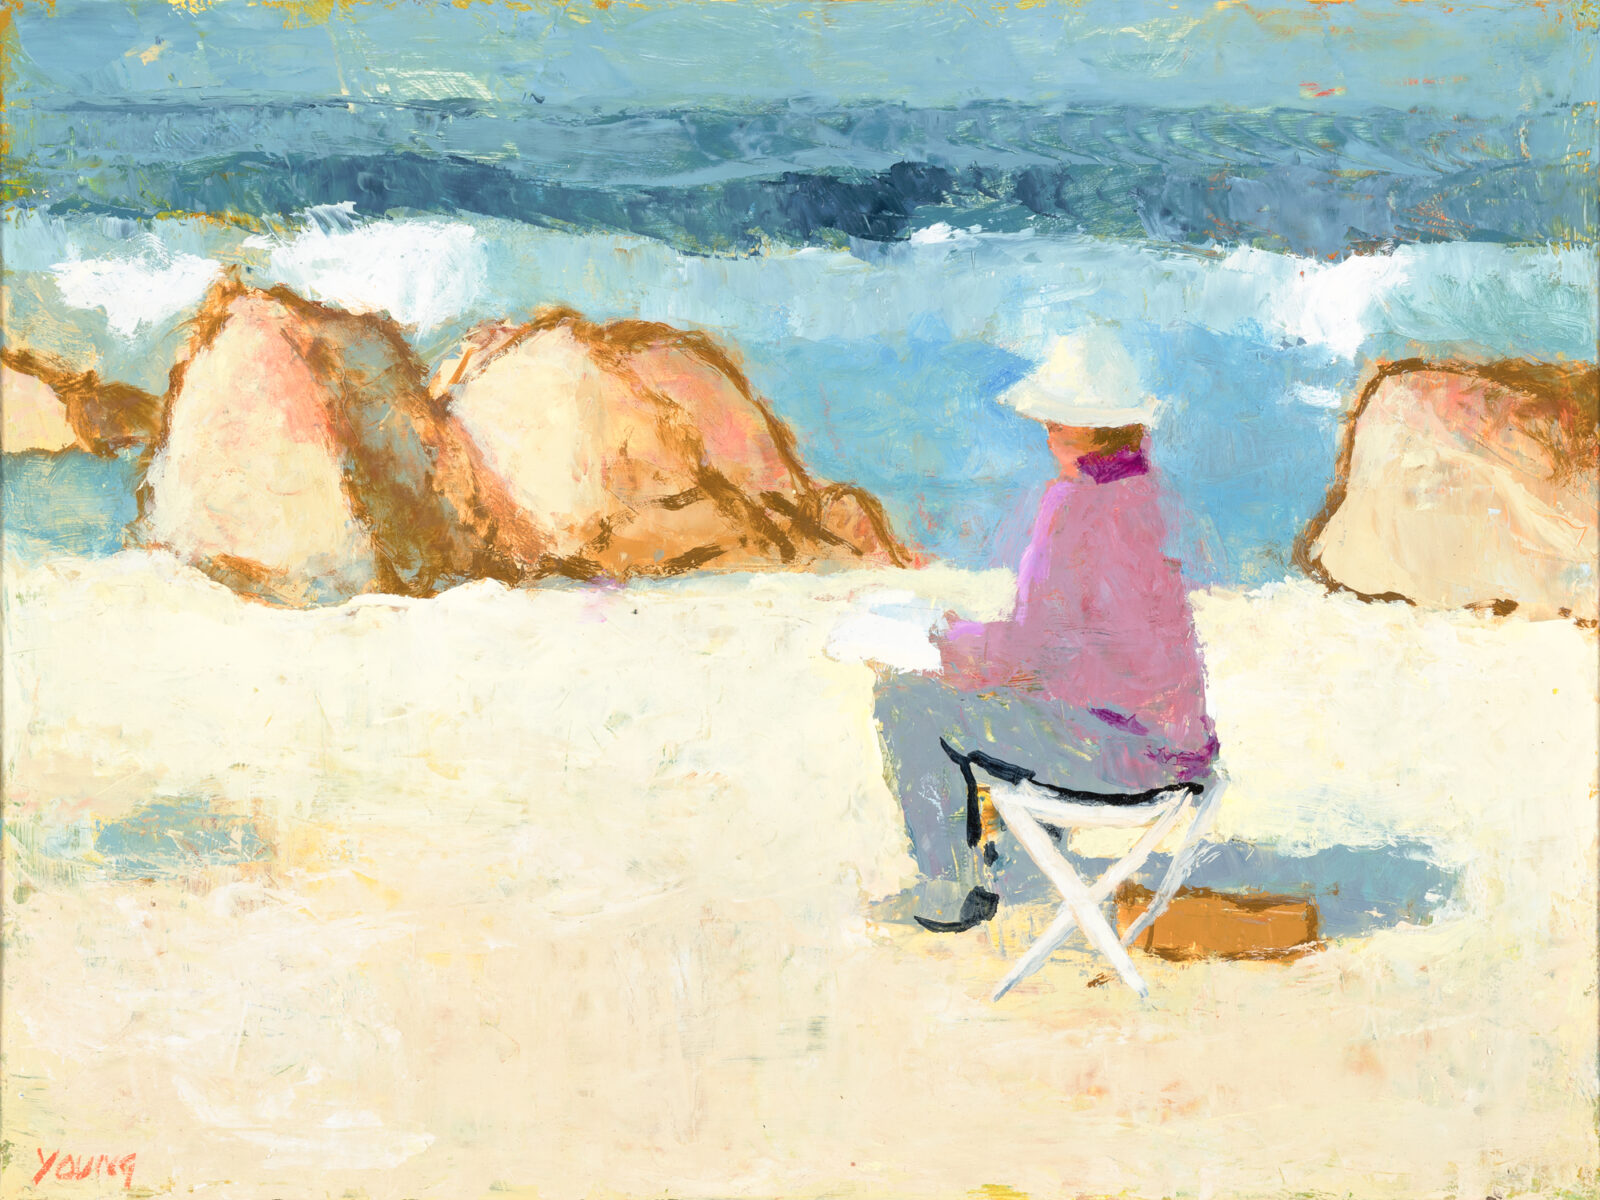 The painter, Bay of fires